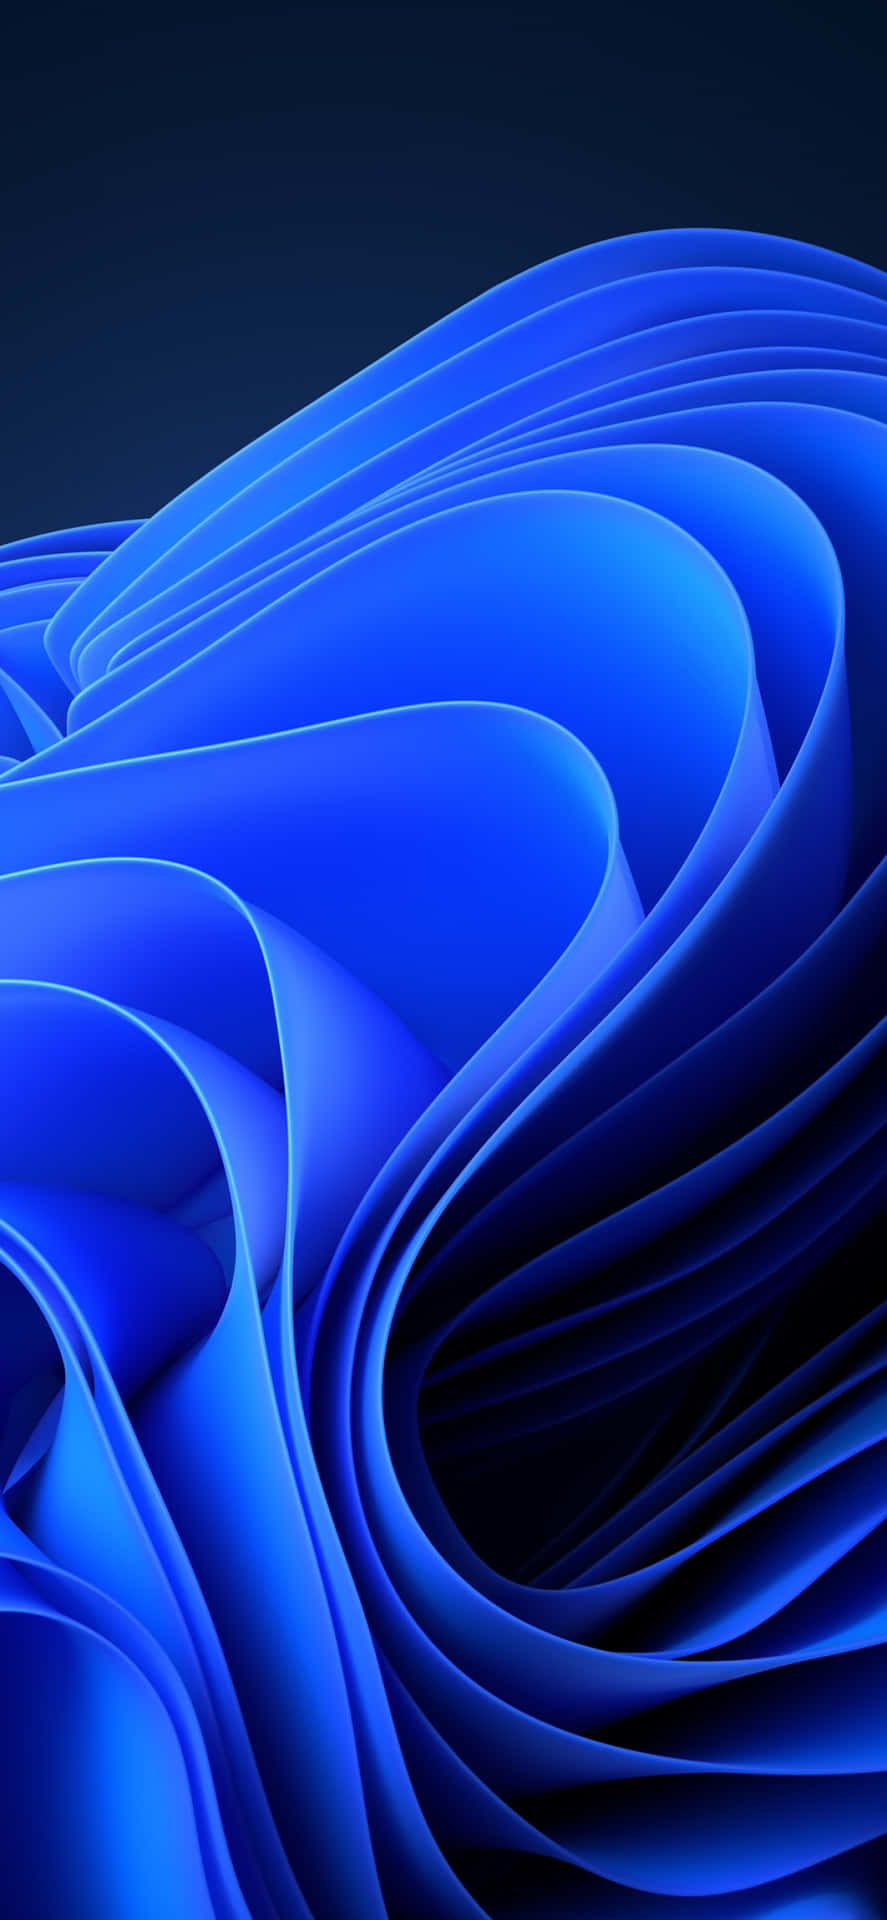 A Blue Abstract Background With Wavy Lines Wallpaper